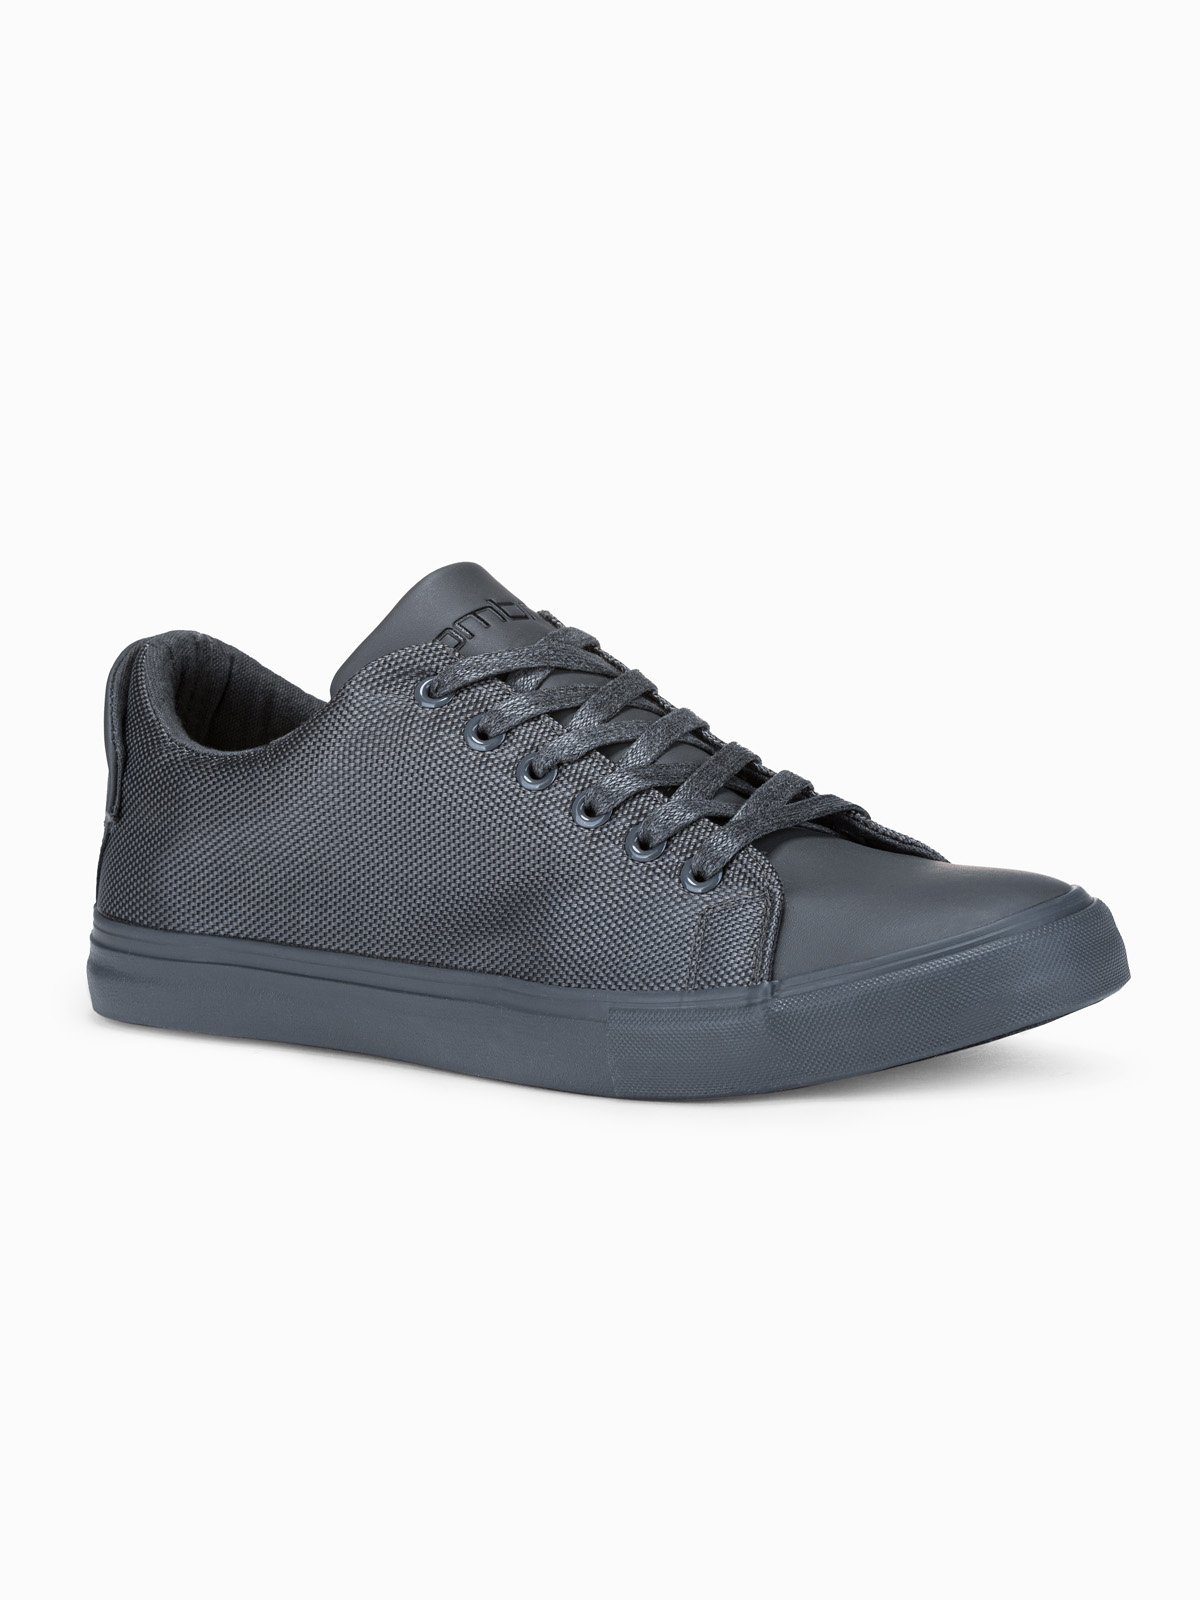 Levně Ombre BASIC men's shoes sneakers in combined materials - gray